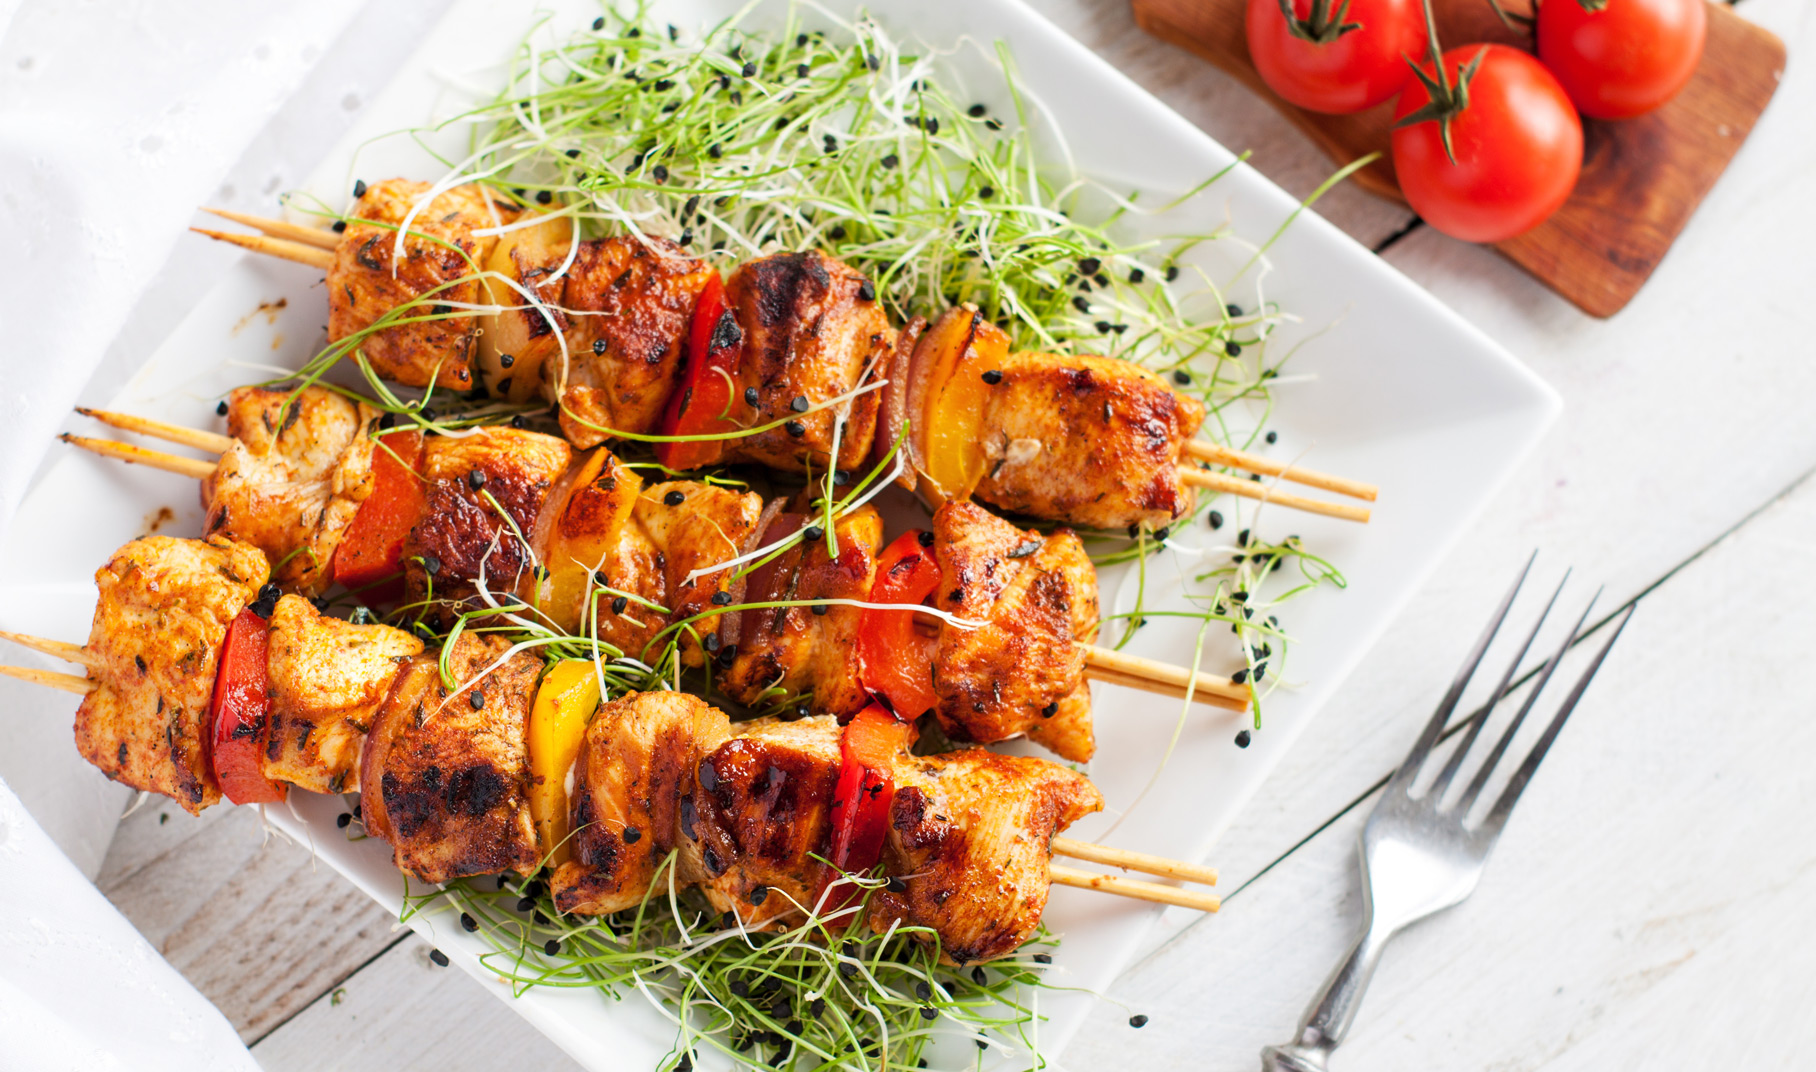 Oven-baked meat skewers